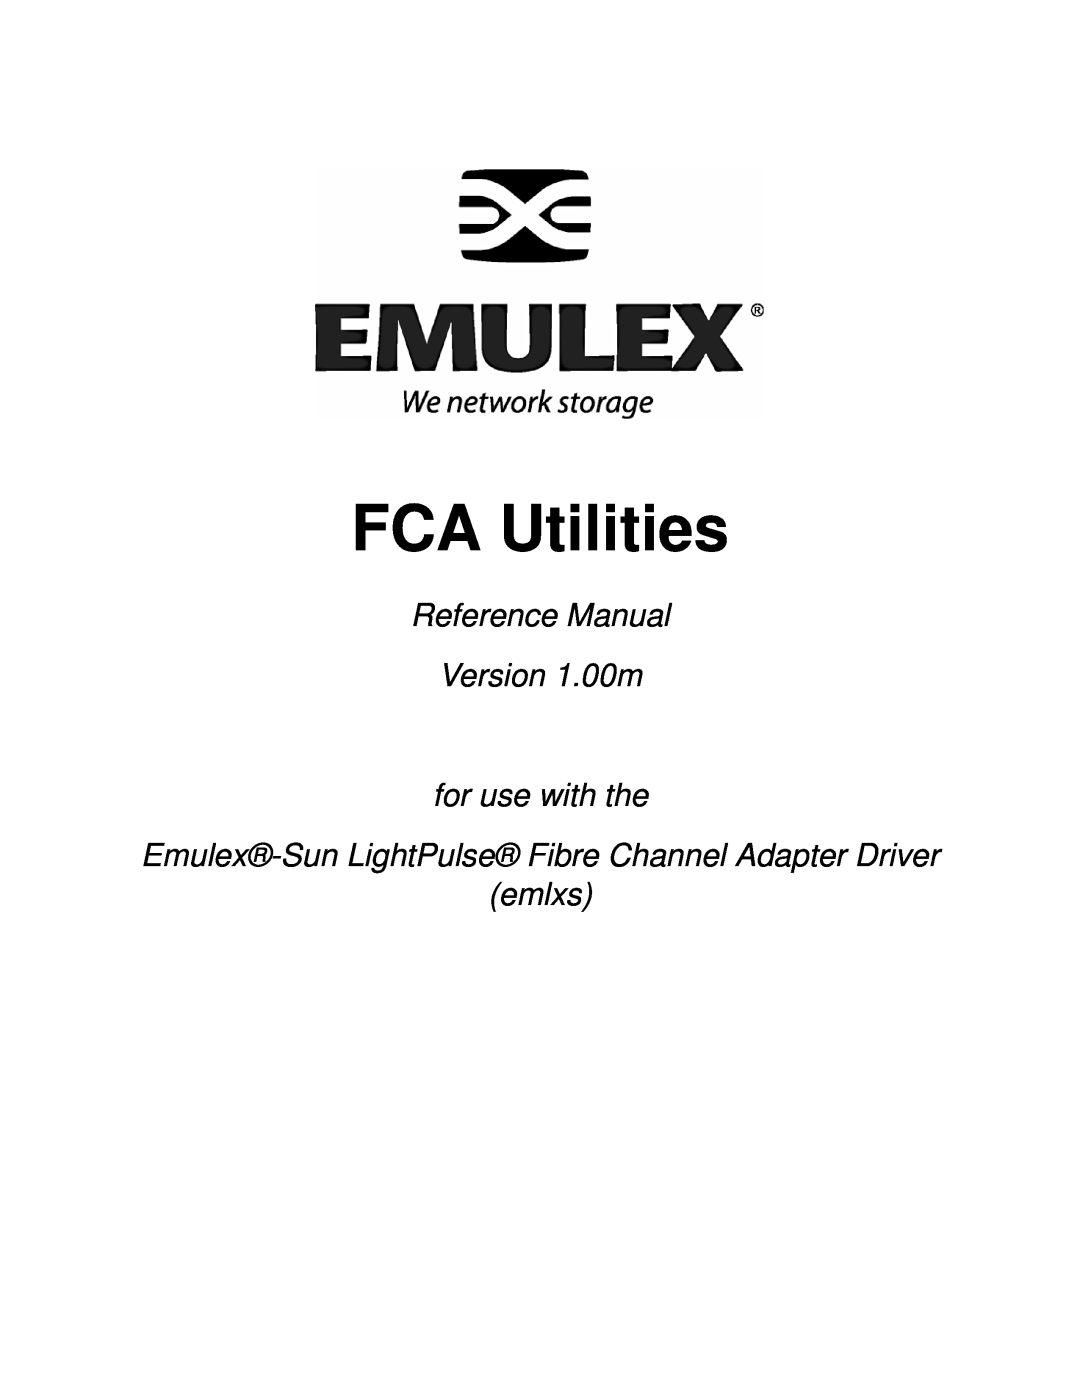 Emulex EMULEX manual FCA Utilities, Reference Manual Version 1.00m for use with the 